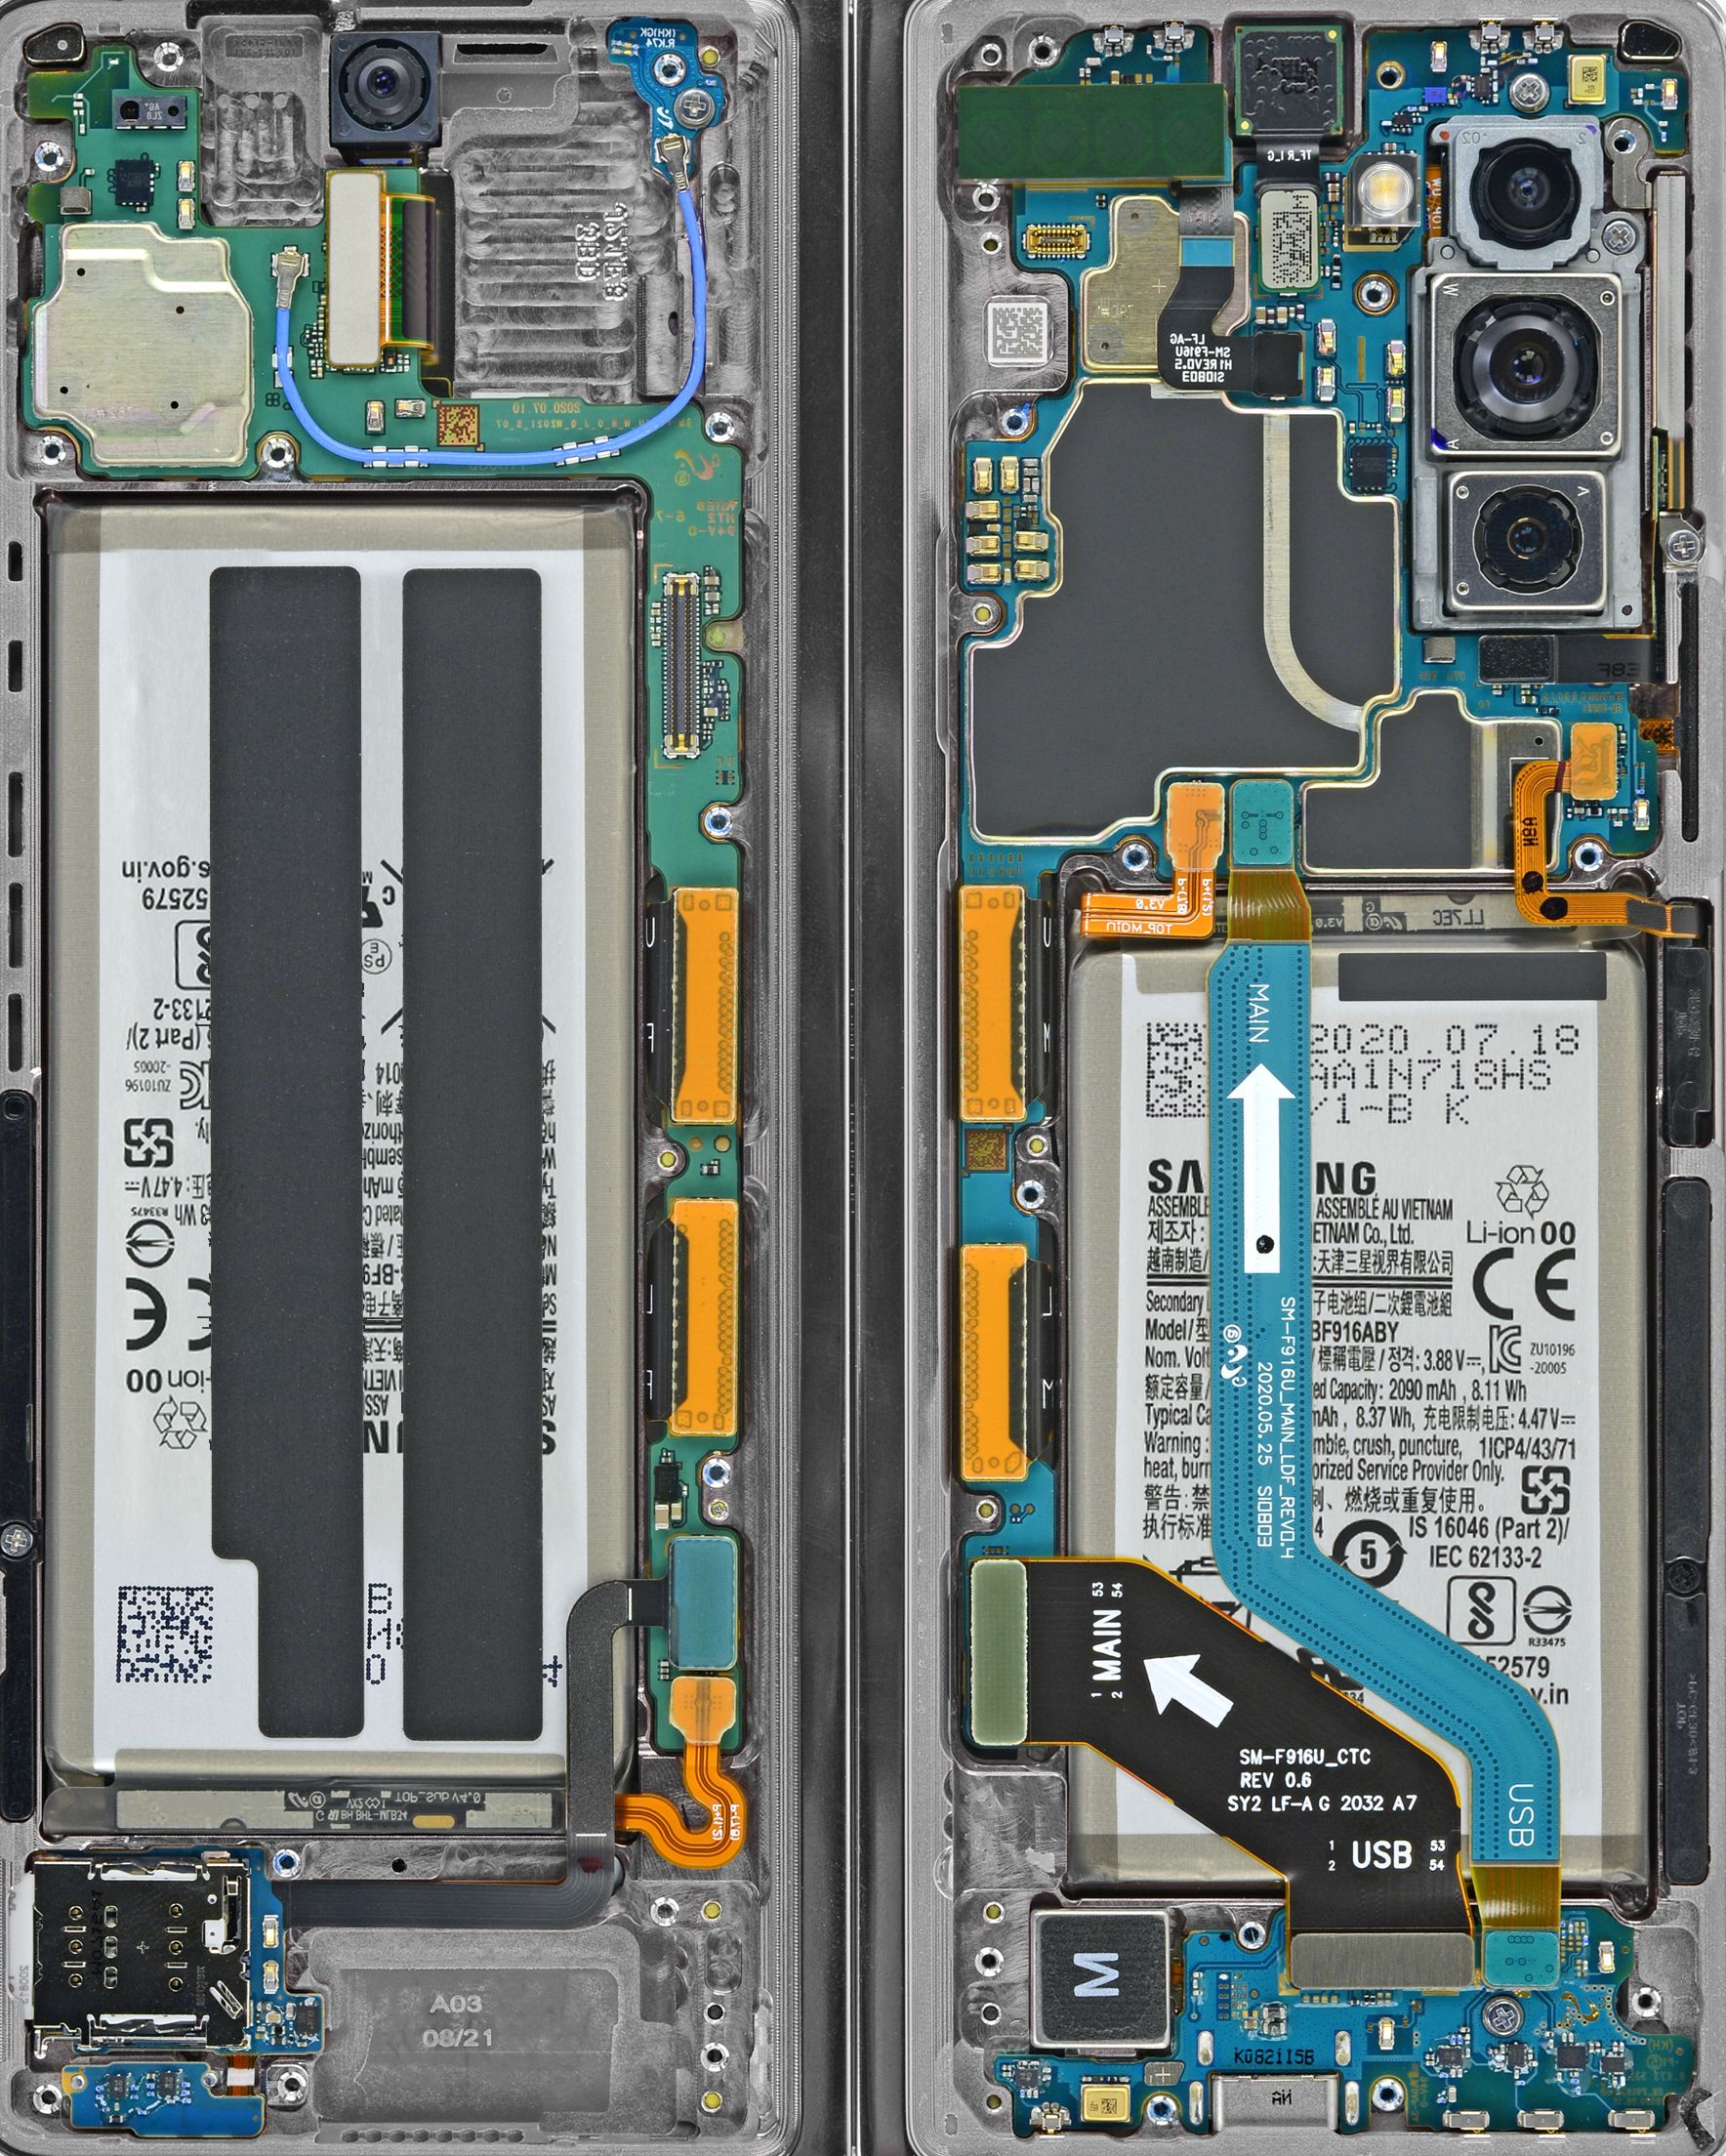 Bring Out The Galaxy Z Fold 2's Detailed Insides With Wallpaper (X Ray, Too)